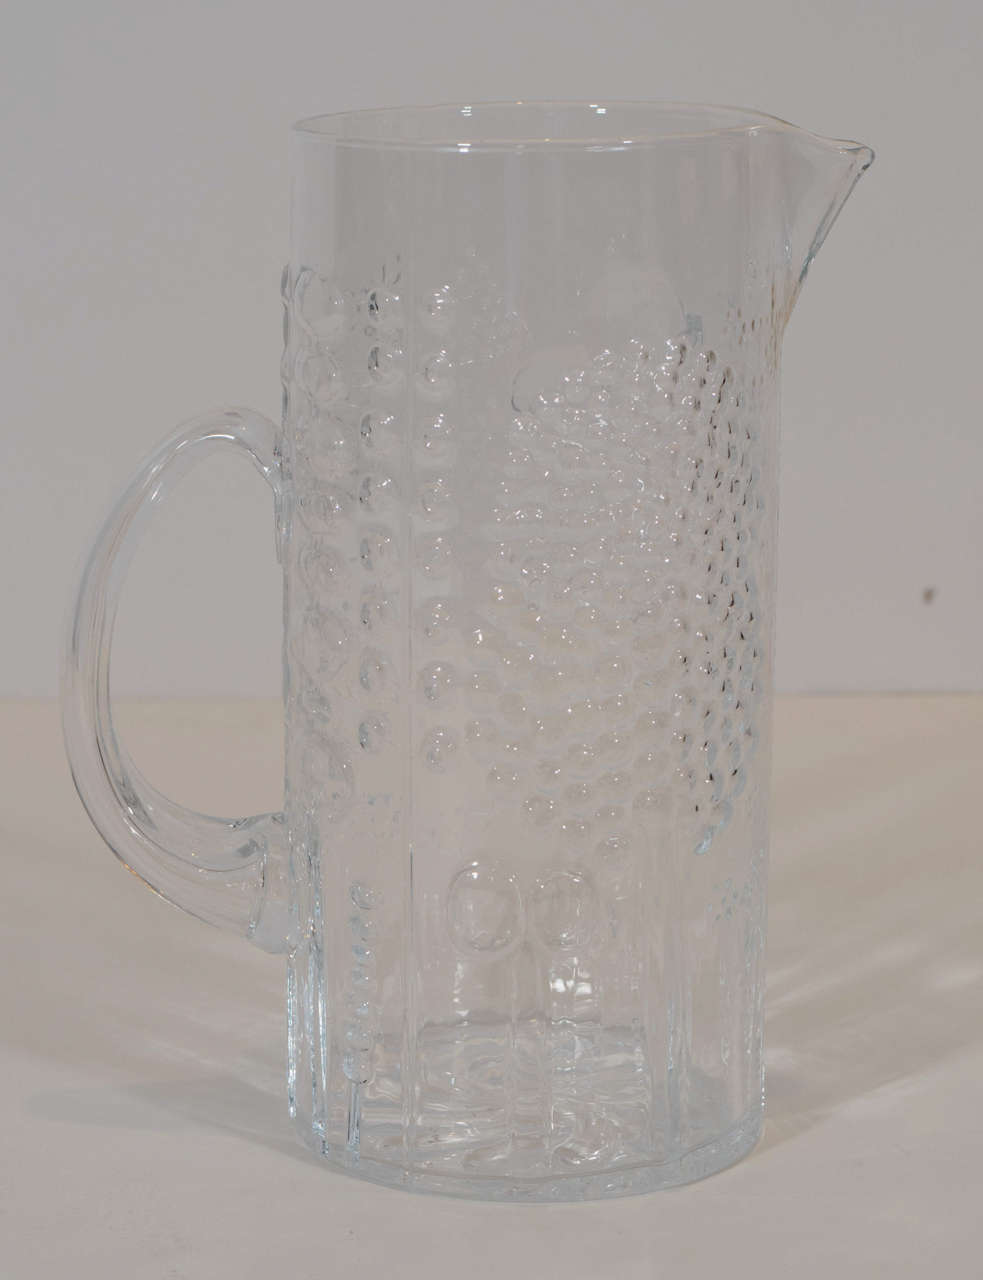 Beautiful crystal pitcher in the Flora series by Oiva Toikka. Also available: a set of six matching drinking glasses. Please contact for location.